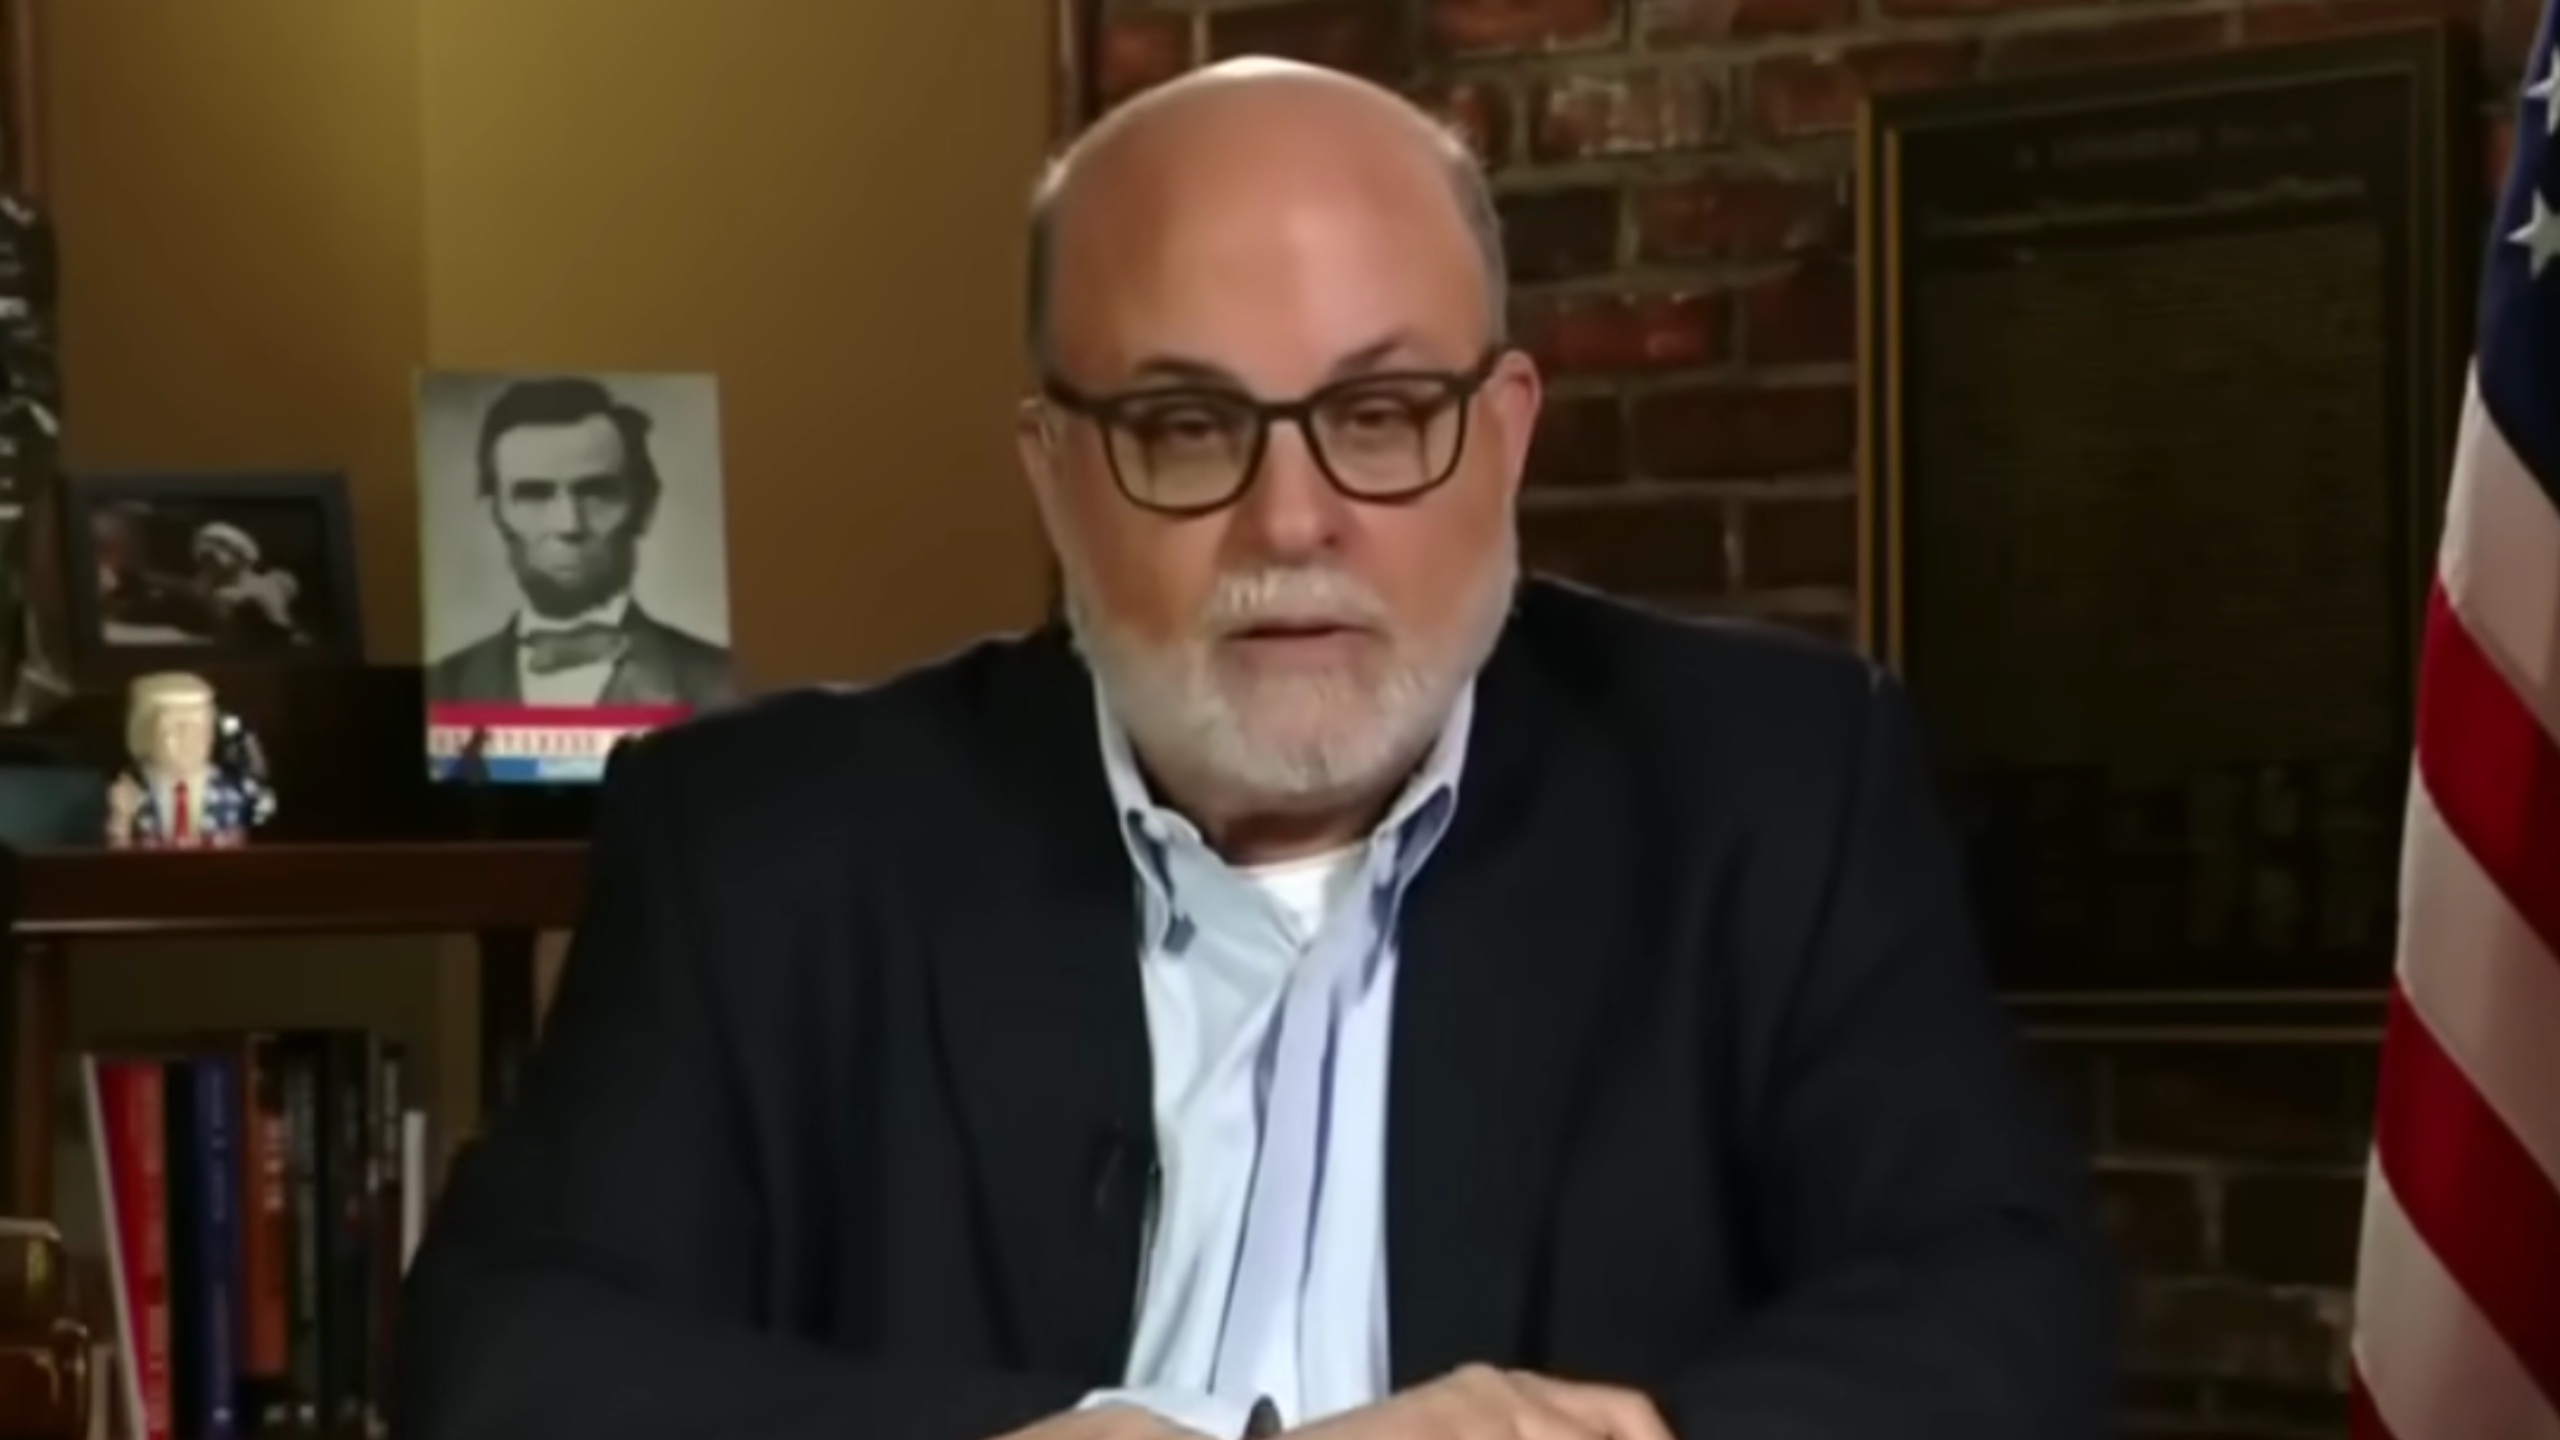 CNN Hammers Mark Levin For ‘Antisemitic’ and ‘Shameful’ Comments About Its Anchors